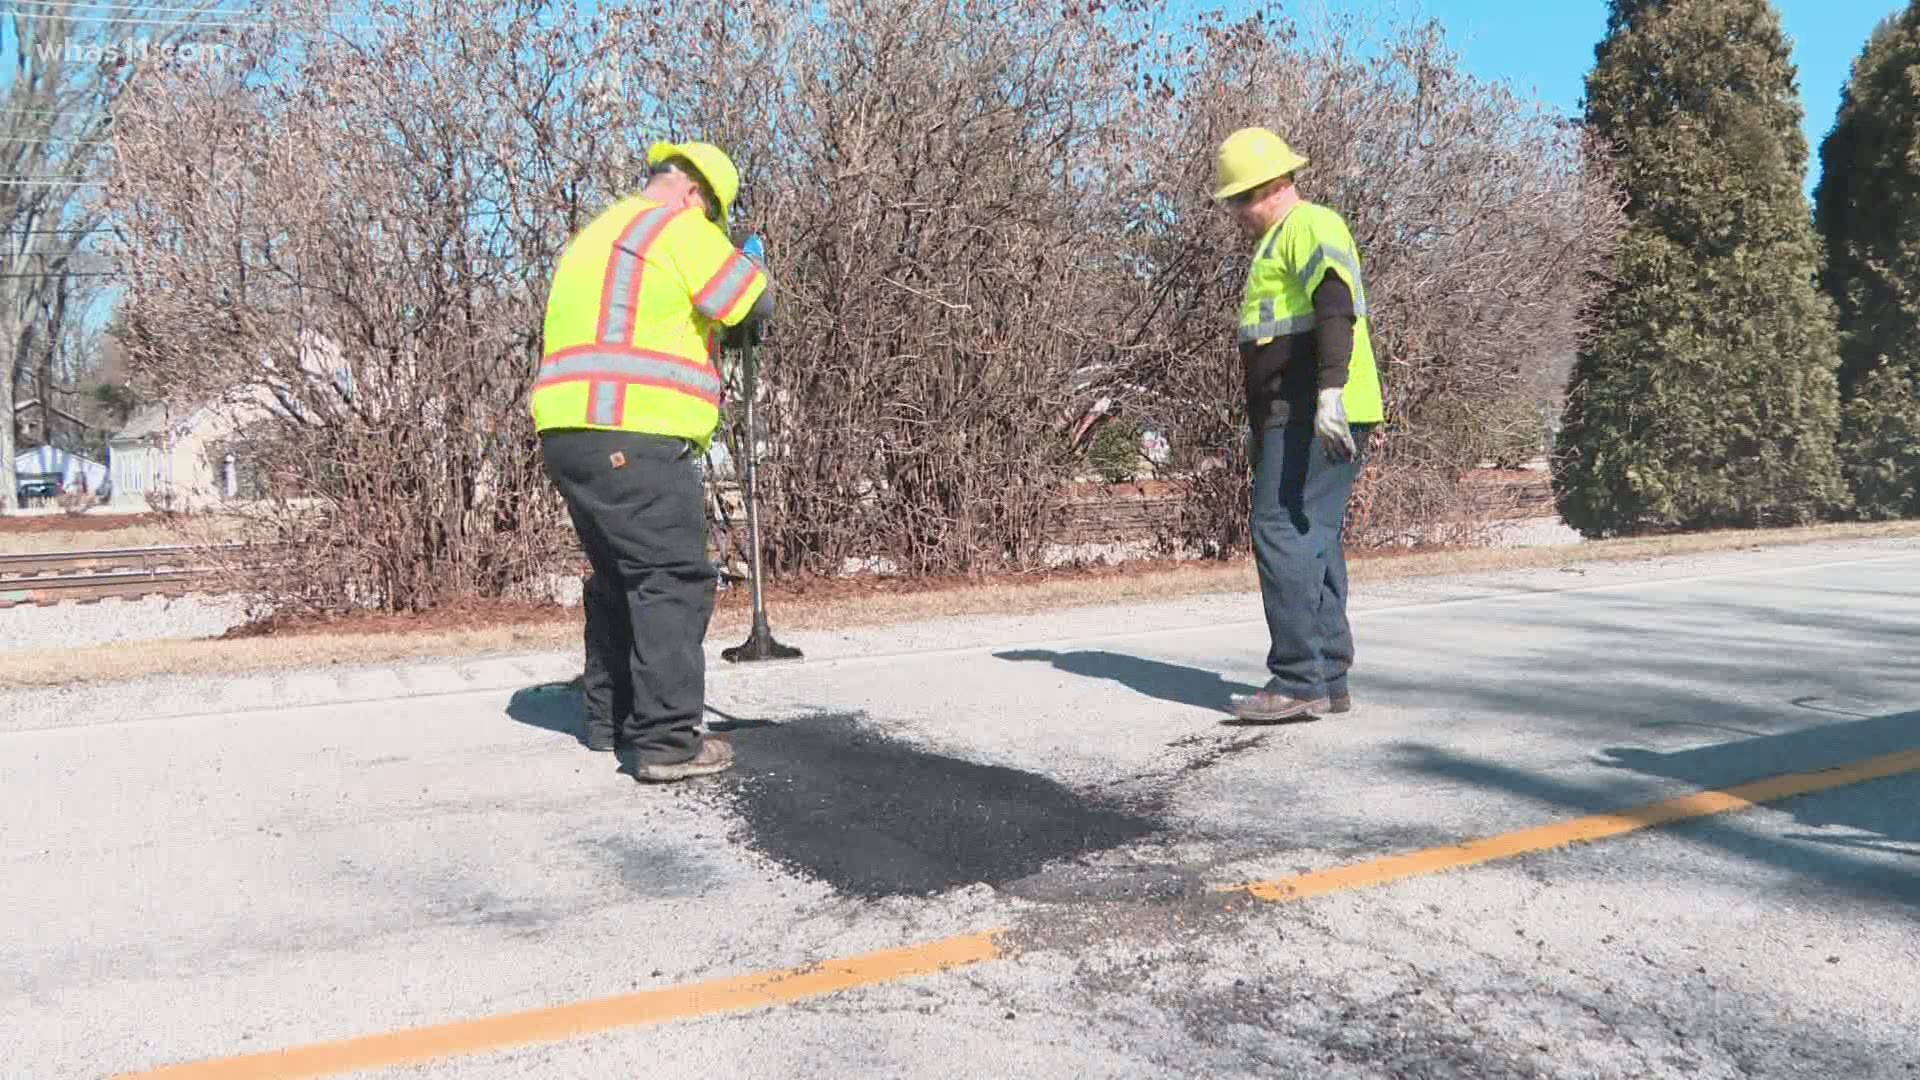 Louisville Metro Public Works has spent the last ten days trying to fix potholes in the area.